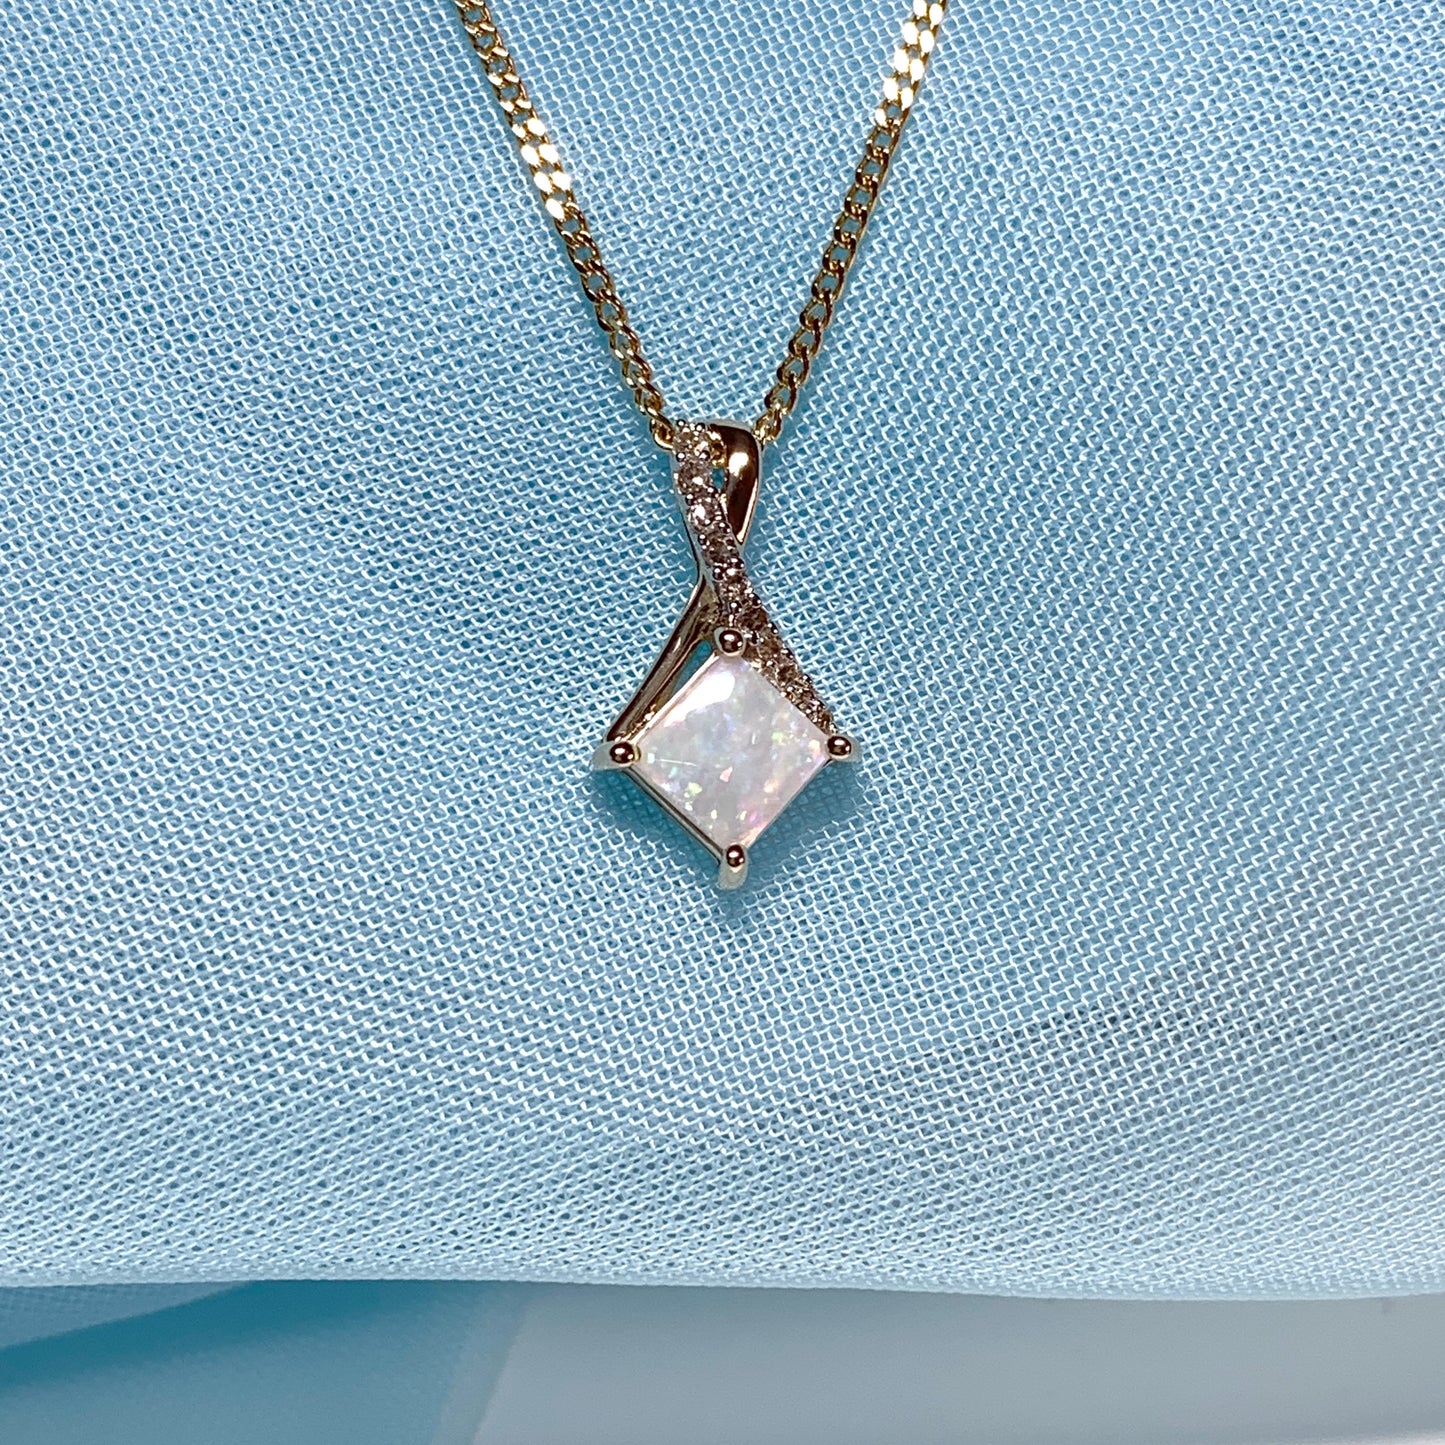 Gold opal and diamond necklace pendent